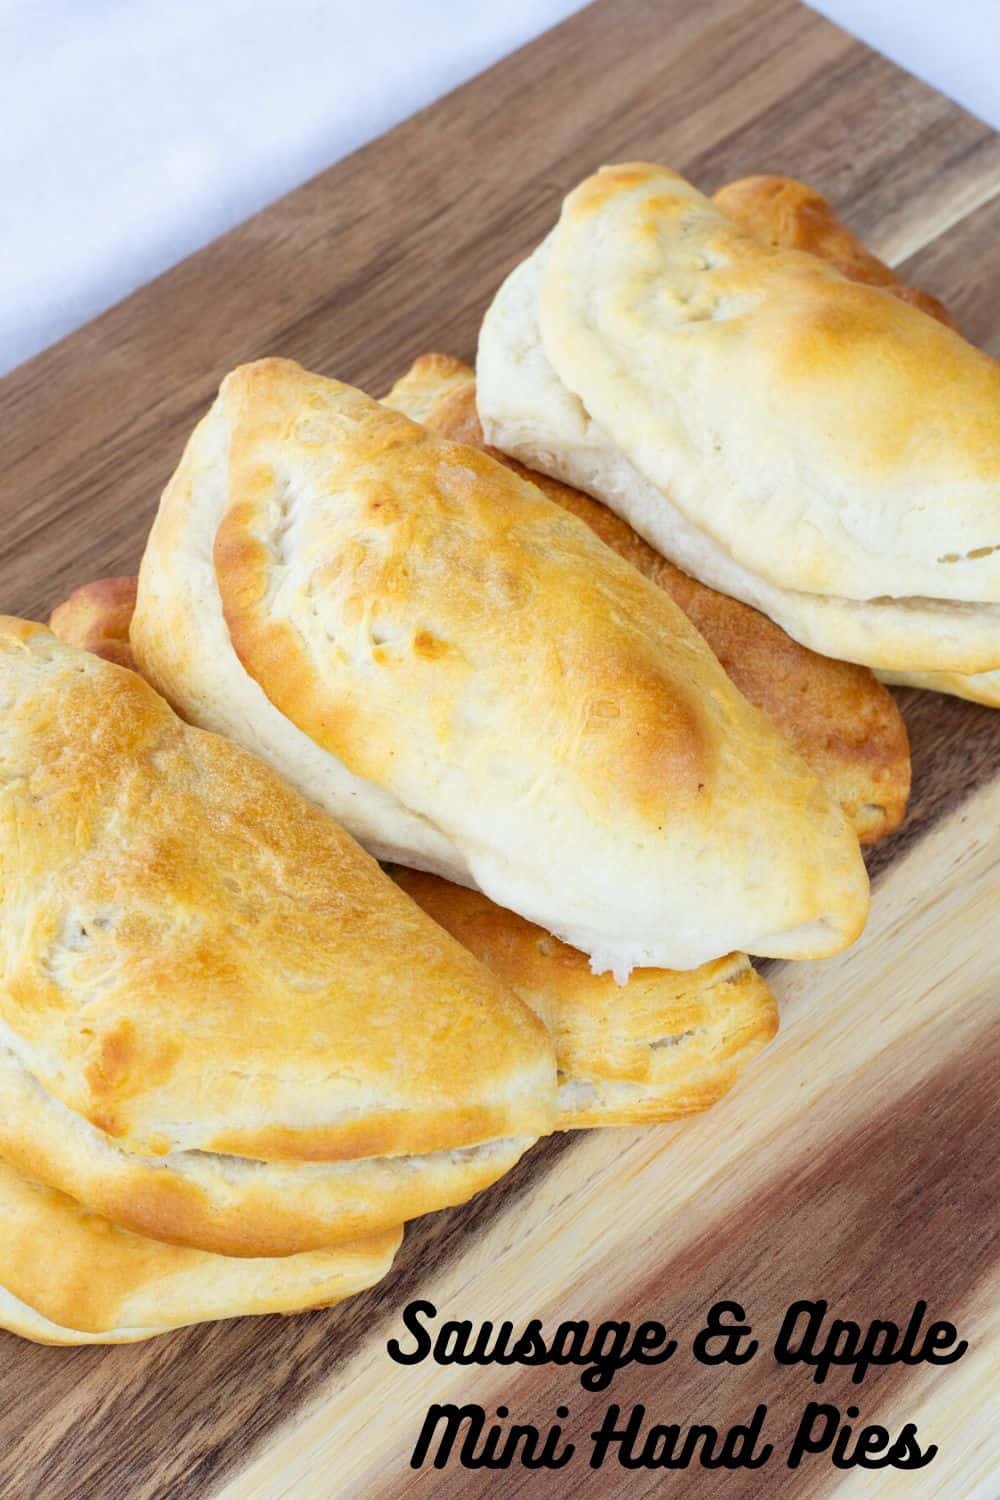 Sausage & Apple Hand Pies are made with ground sausage, apples, celery, and canned biscuits for a tasty mini hand held snack that is so easy to make!